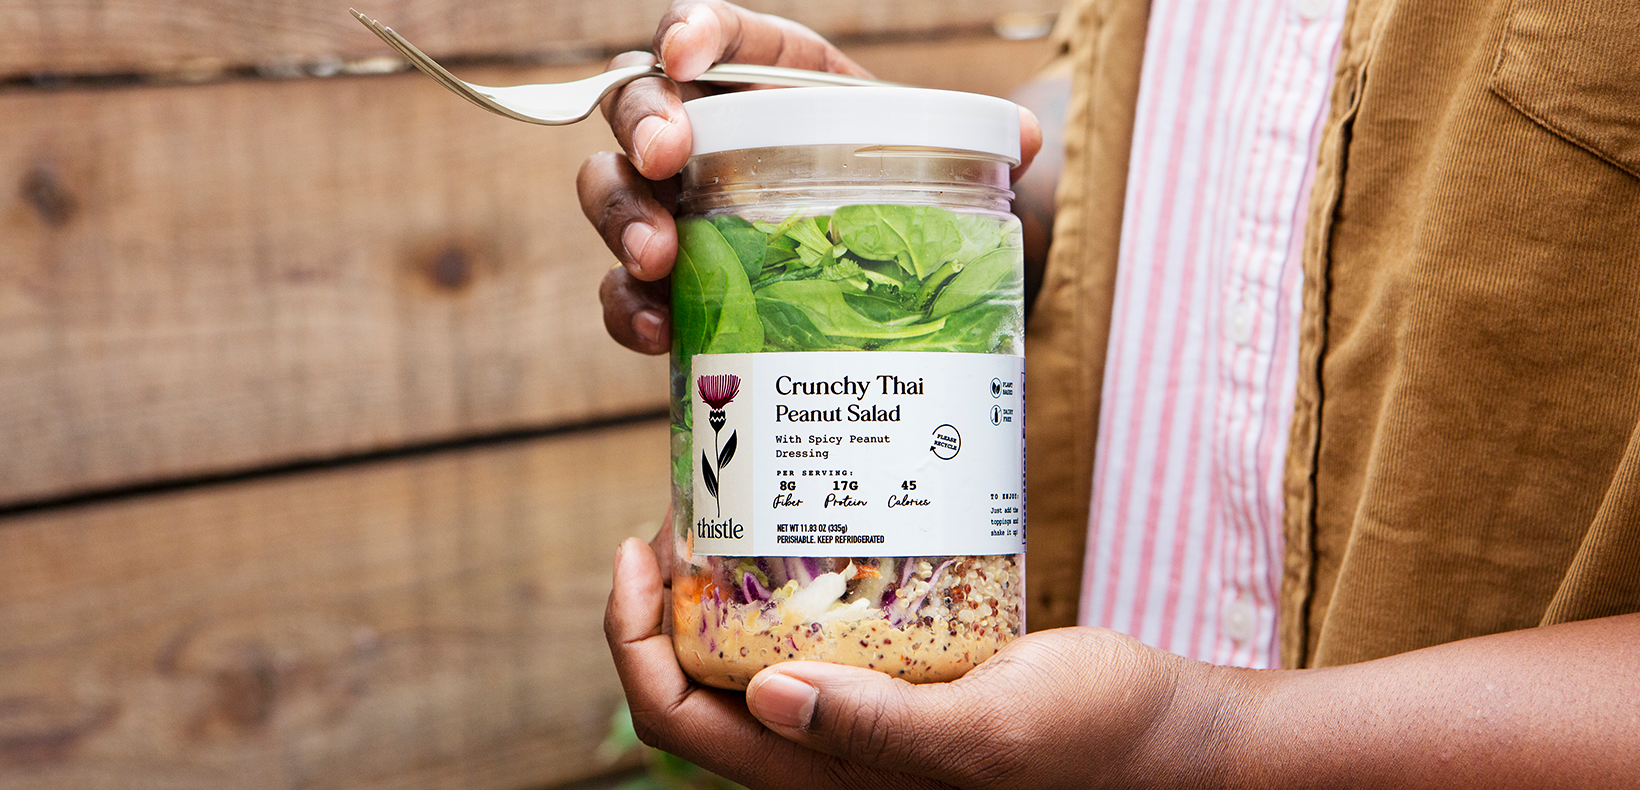 Thistle’s Smart, Vibrant Packaging Makes Meal Delivery Look Fresh as Hell